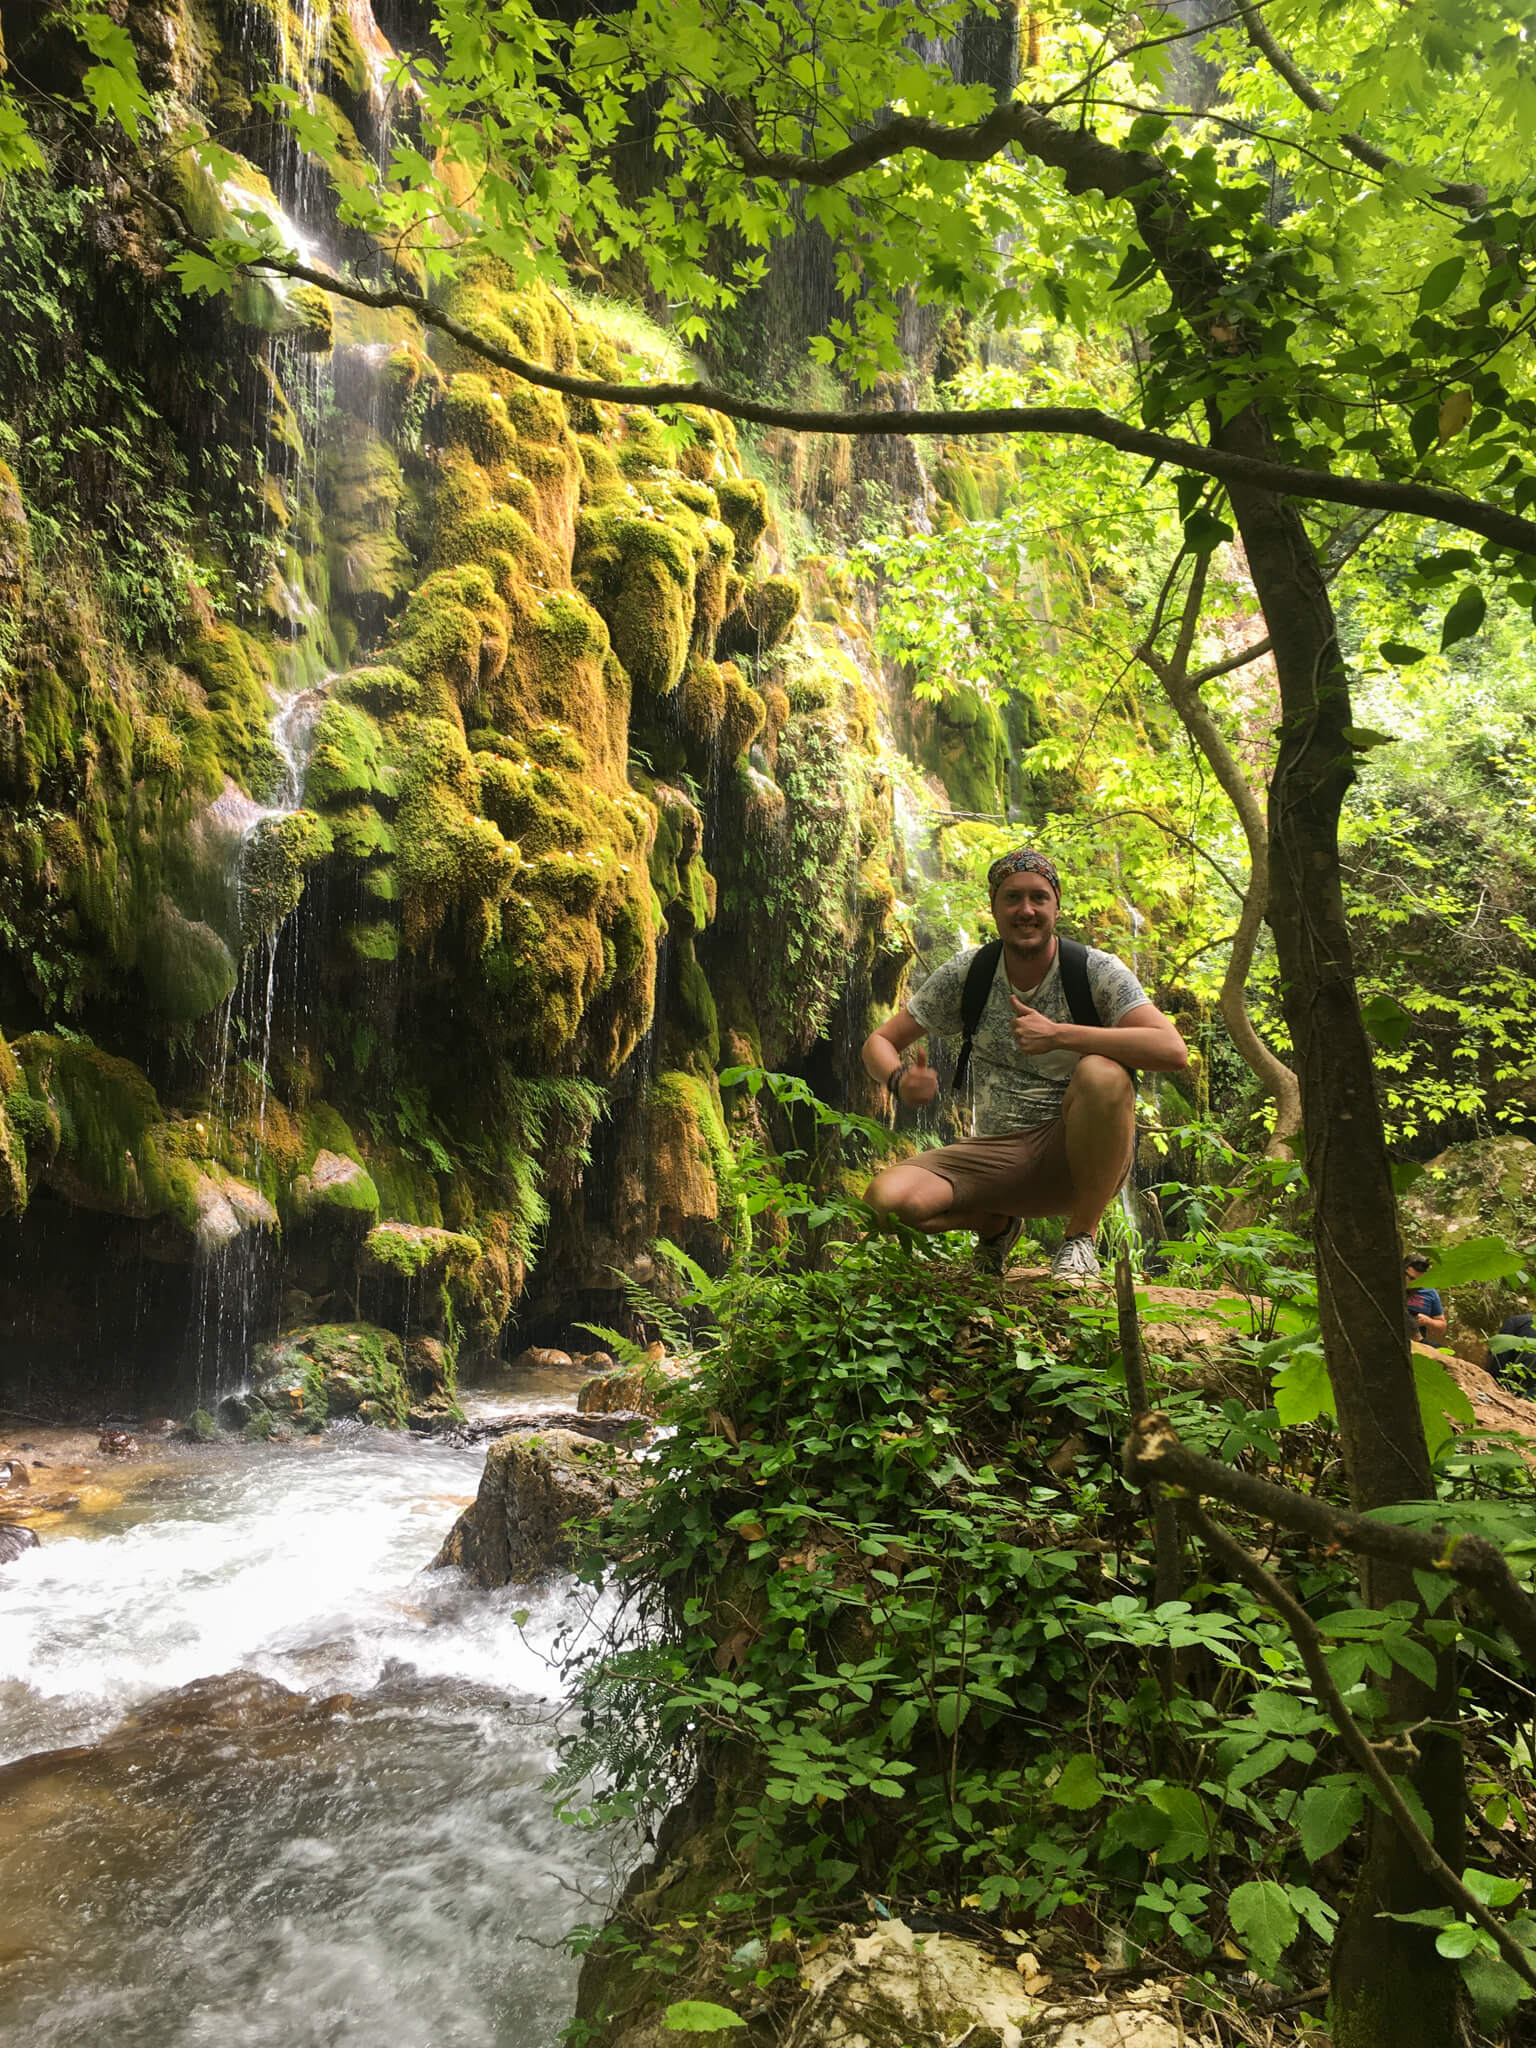 Me, squatting in a lush green forest with a small waterfall and lots of green moss in the background.